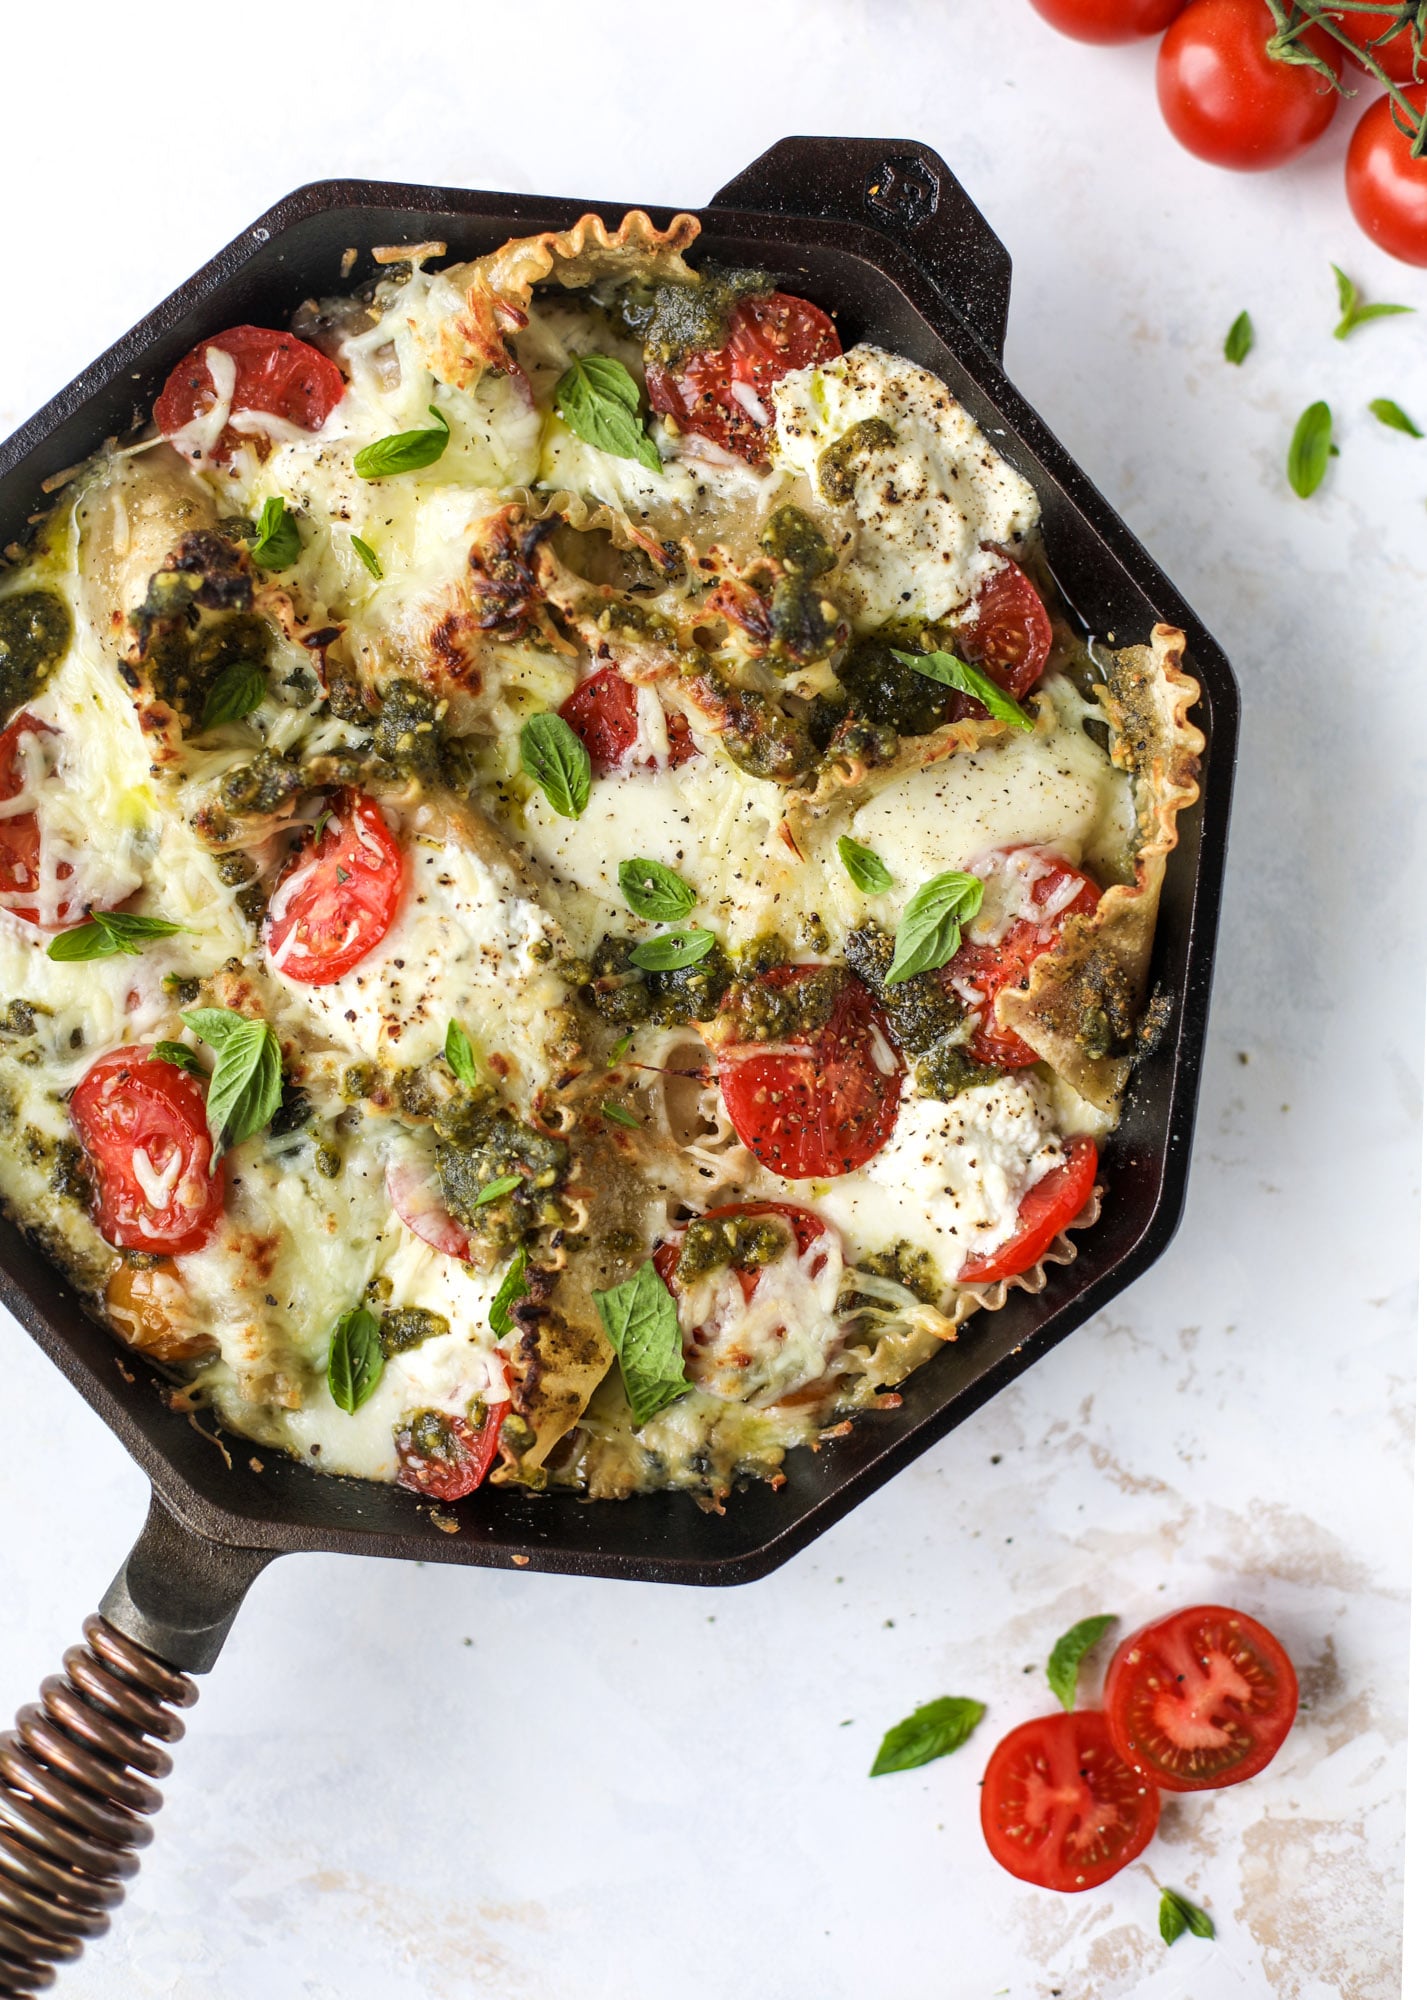 Quick caprese skillet lasagna is a lovely and comforting summer meal! Lots of fresh basil, ripe tomatoes and cheese bring this easy weeknight meal together.